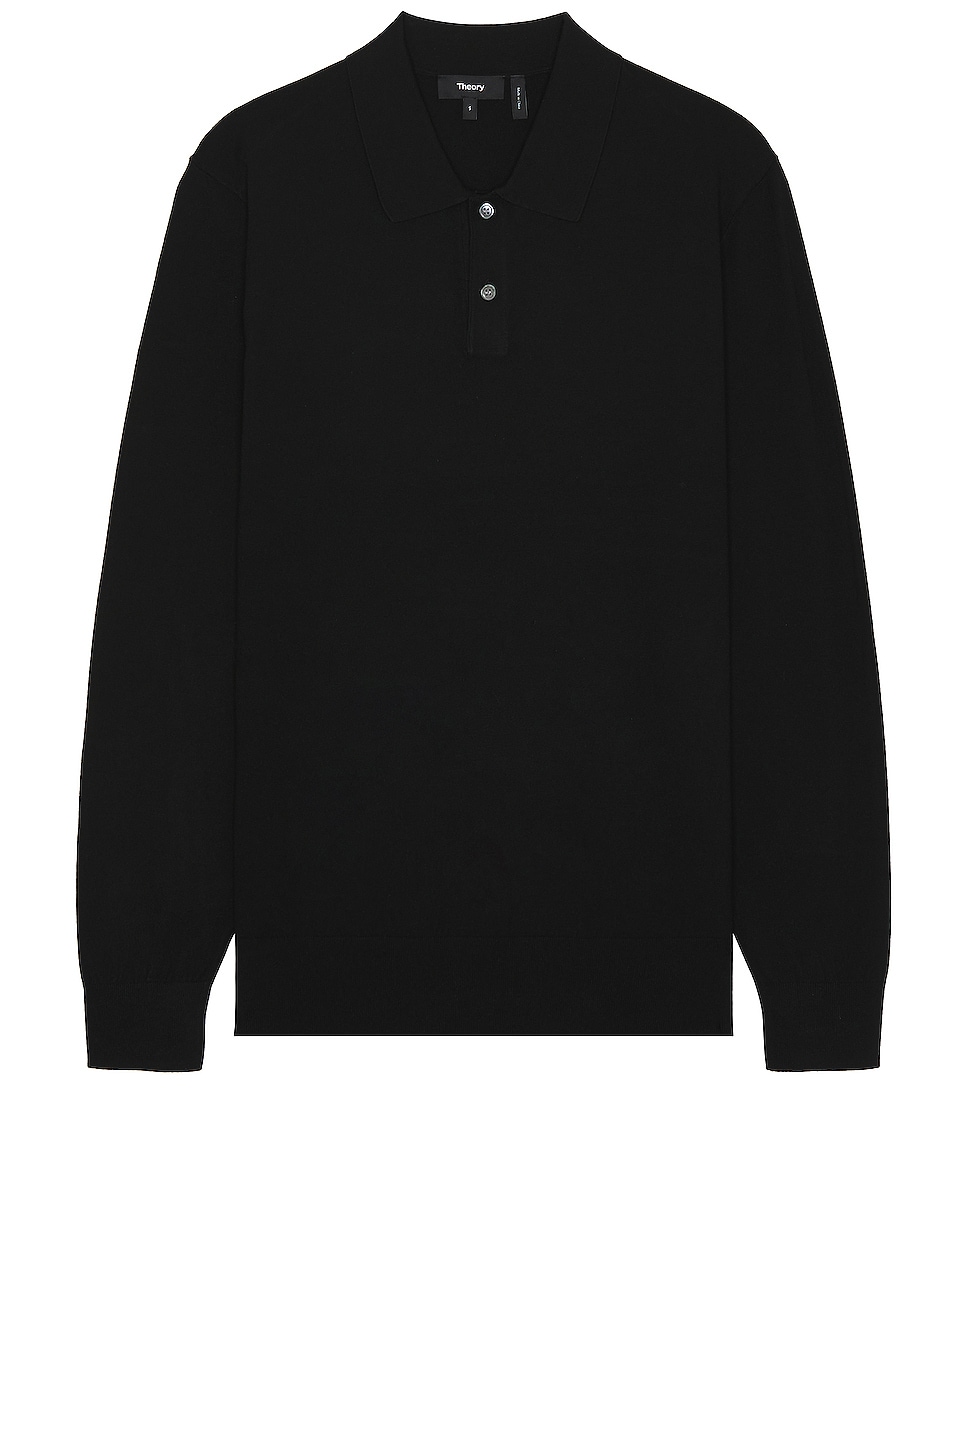 Image 1 of Theory Goris Long Sleeve Polo in Black